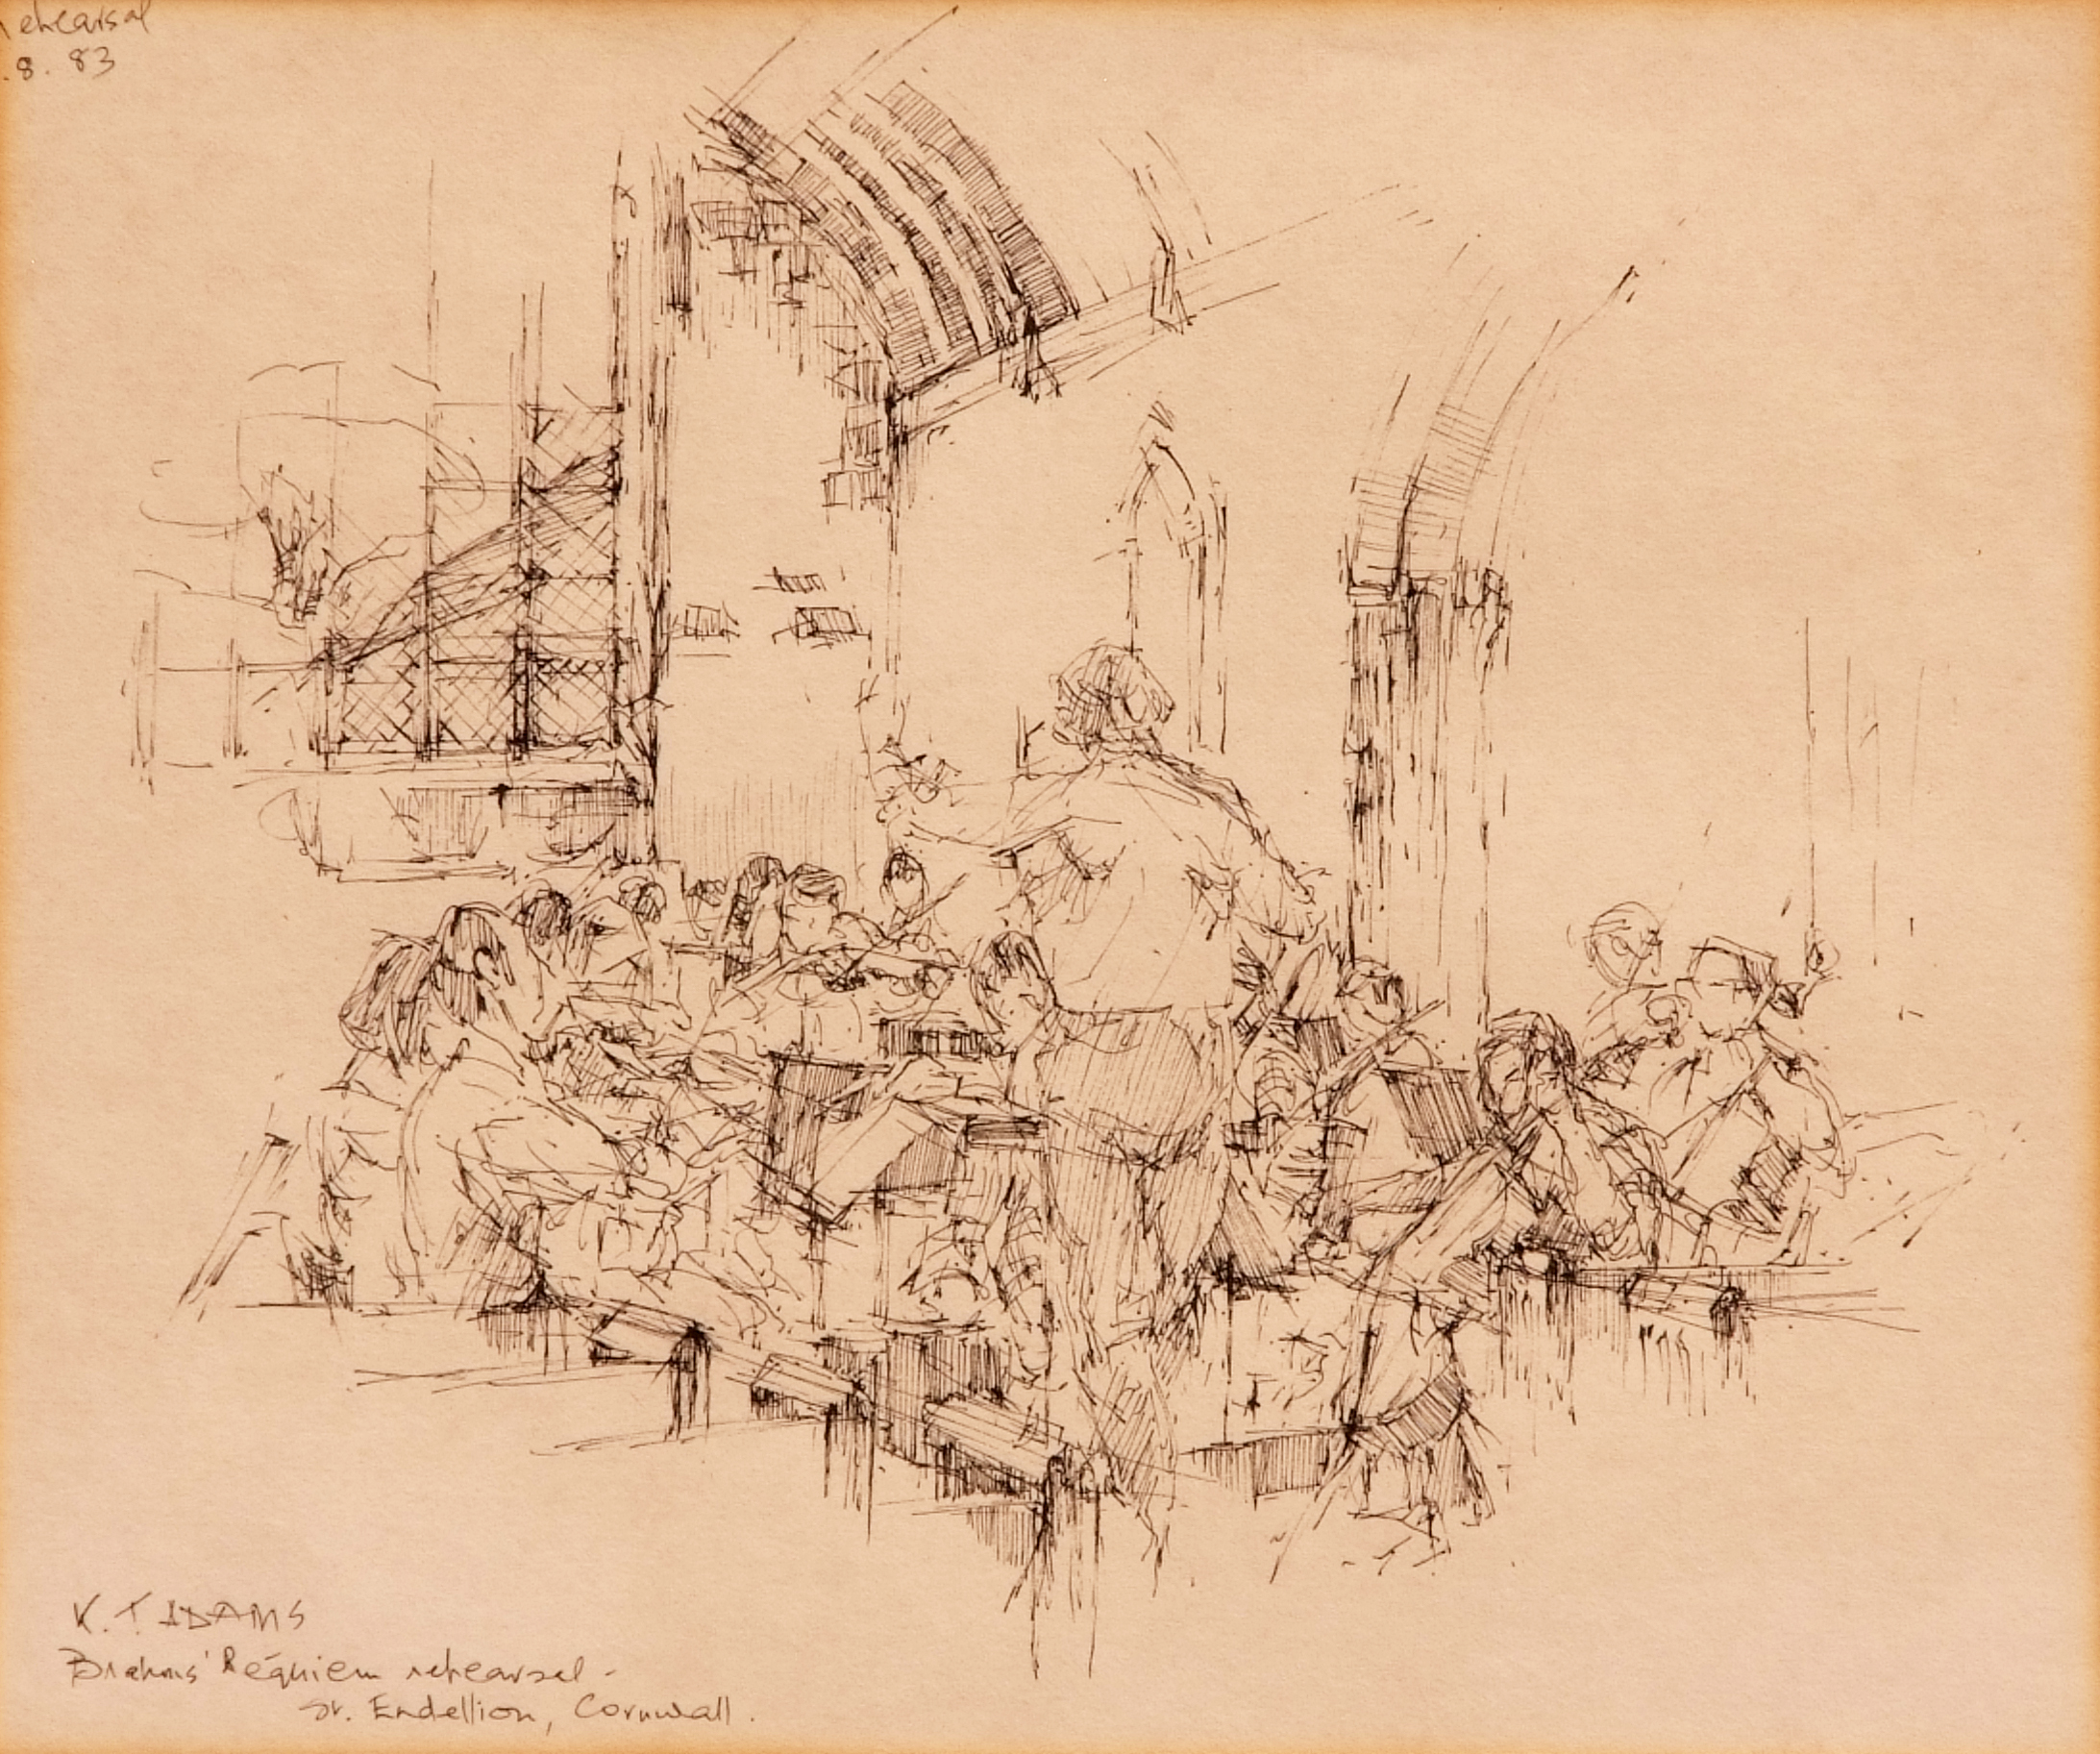 K T Adams, inscribed Brahms Riquiem Rehearsal, St Endellion, Cornwall ( 83) pen and ink drawing,